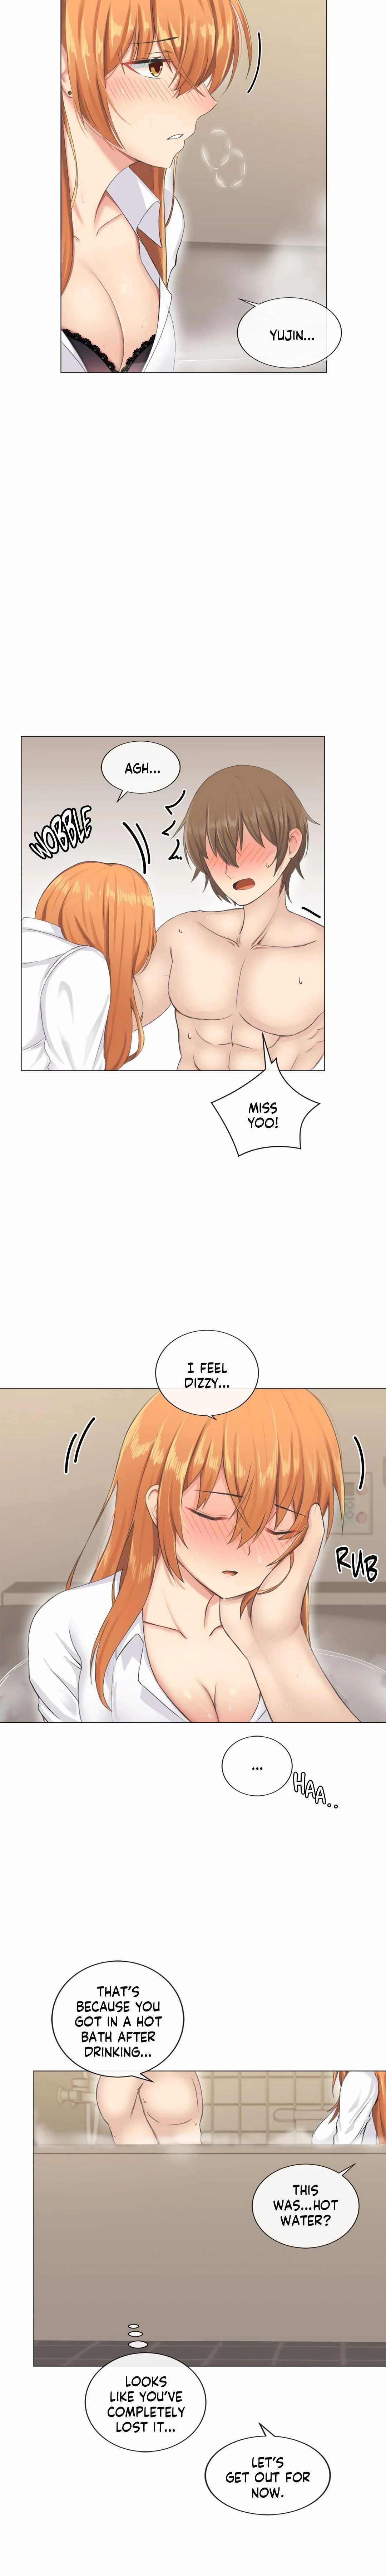 [Dumangoon, 130F] Sexcape Room: Pile Up Ch.9/9 [English] [Manhwa PDF] Completed 70